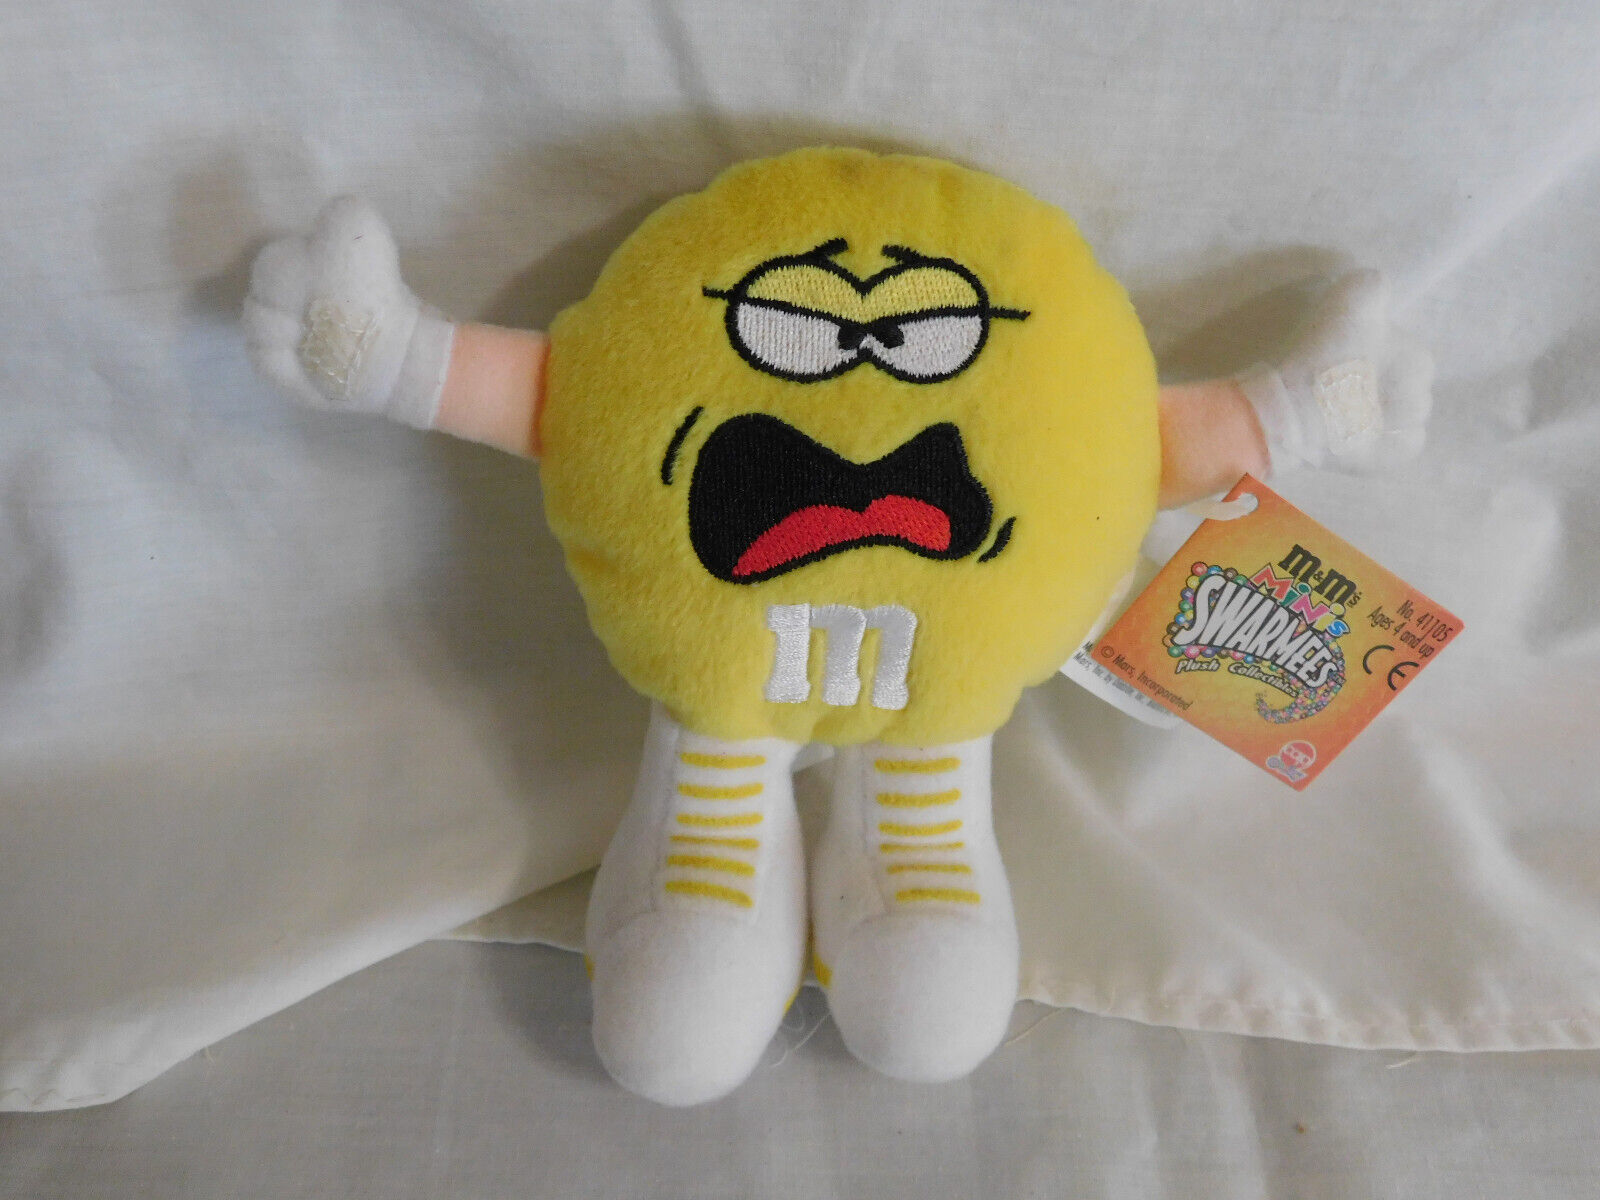 M M's Yellin Yellow Swarmees Plush Stuffed toy 1998 4 1/2 Inches Tall - $7.99